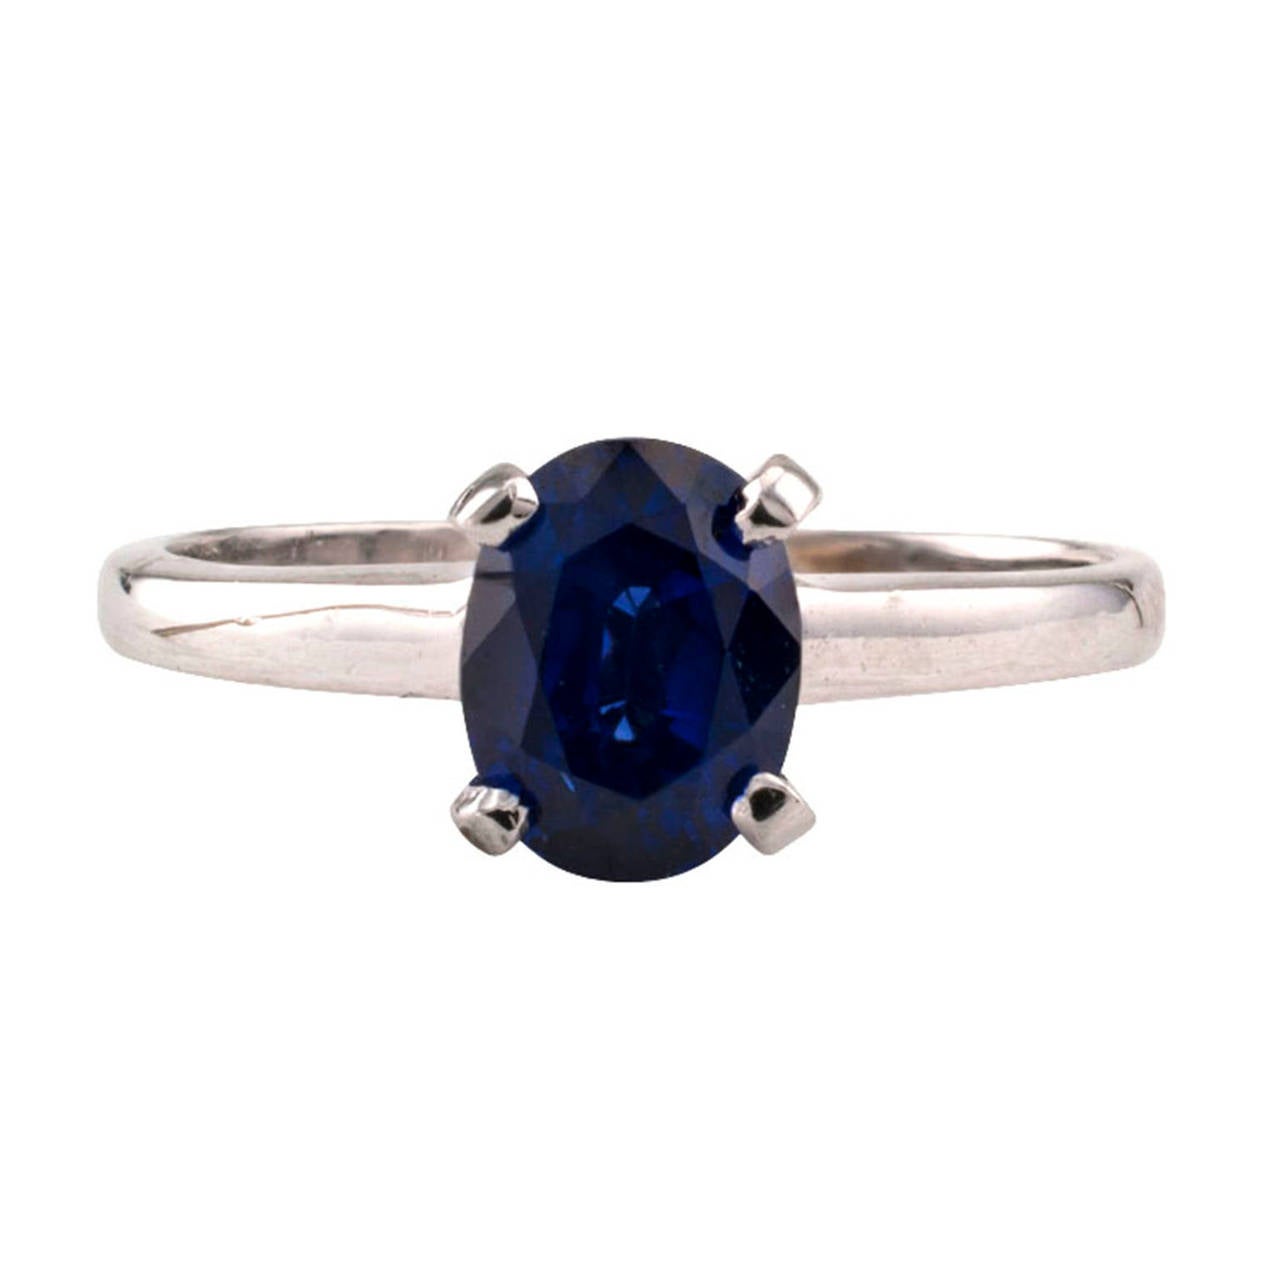 1.62 Carats Blue Sapphire Solitaire Ring
Estate Blue Sapphire ring.   Across the centuries, blue sapphires have been associated with nobility, truth, sincerity and faithfulness.  This marvelous solitaire ring showcases a really beautiful bright and